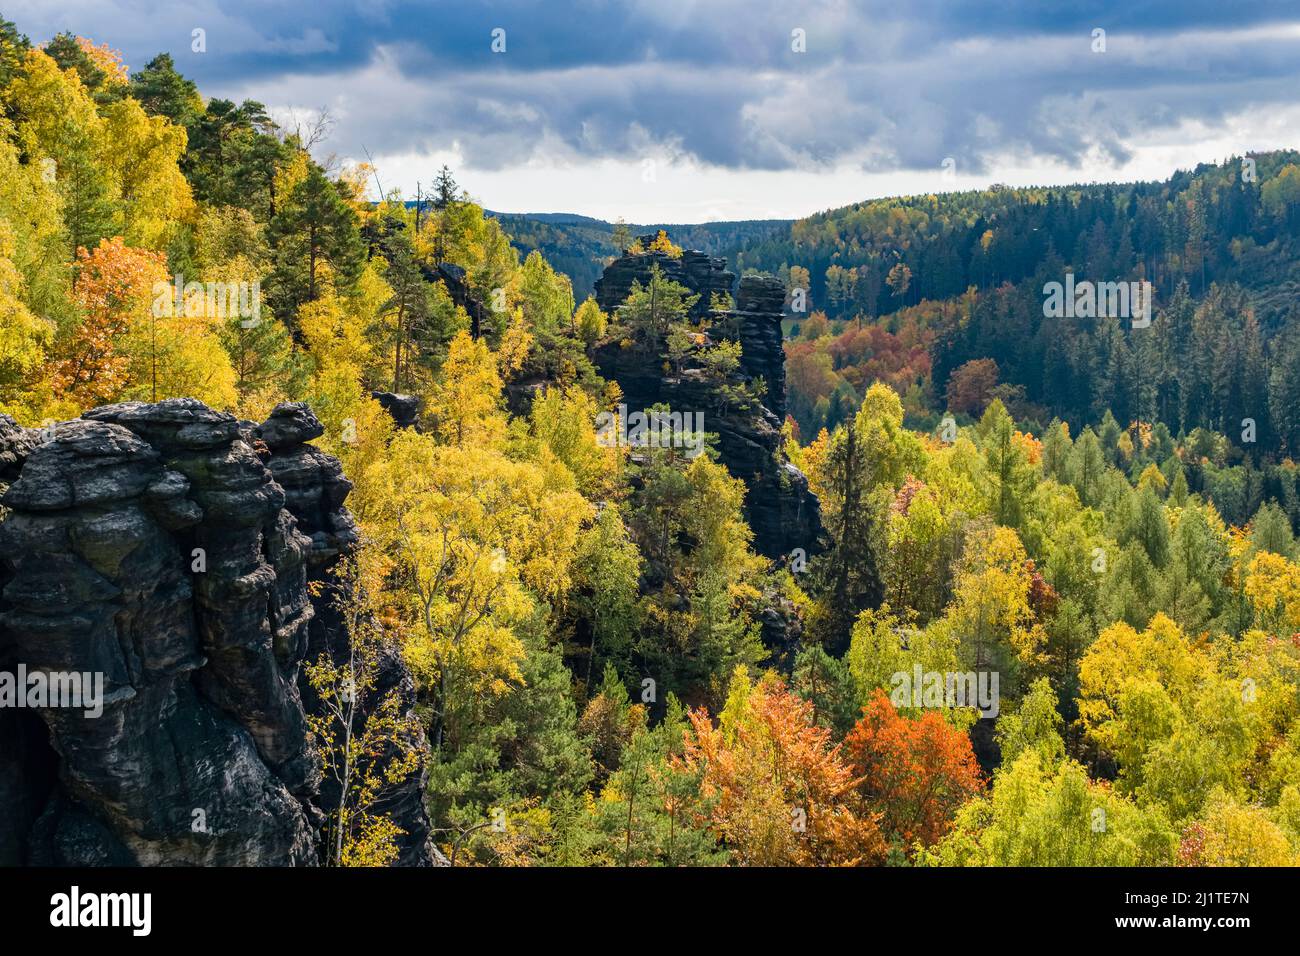 Landscape with rock formations and colorful trees in Bielatal area of the Saxon Switzerland National Park in autumn. Stock Photo